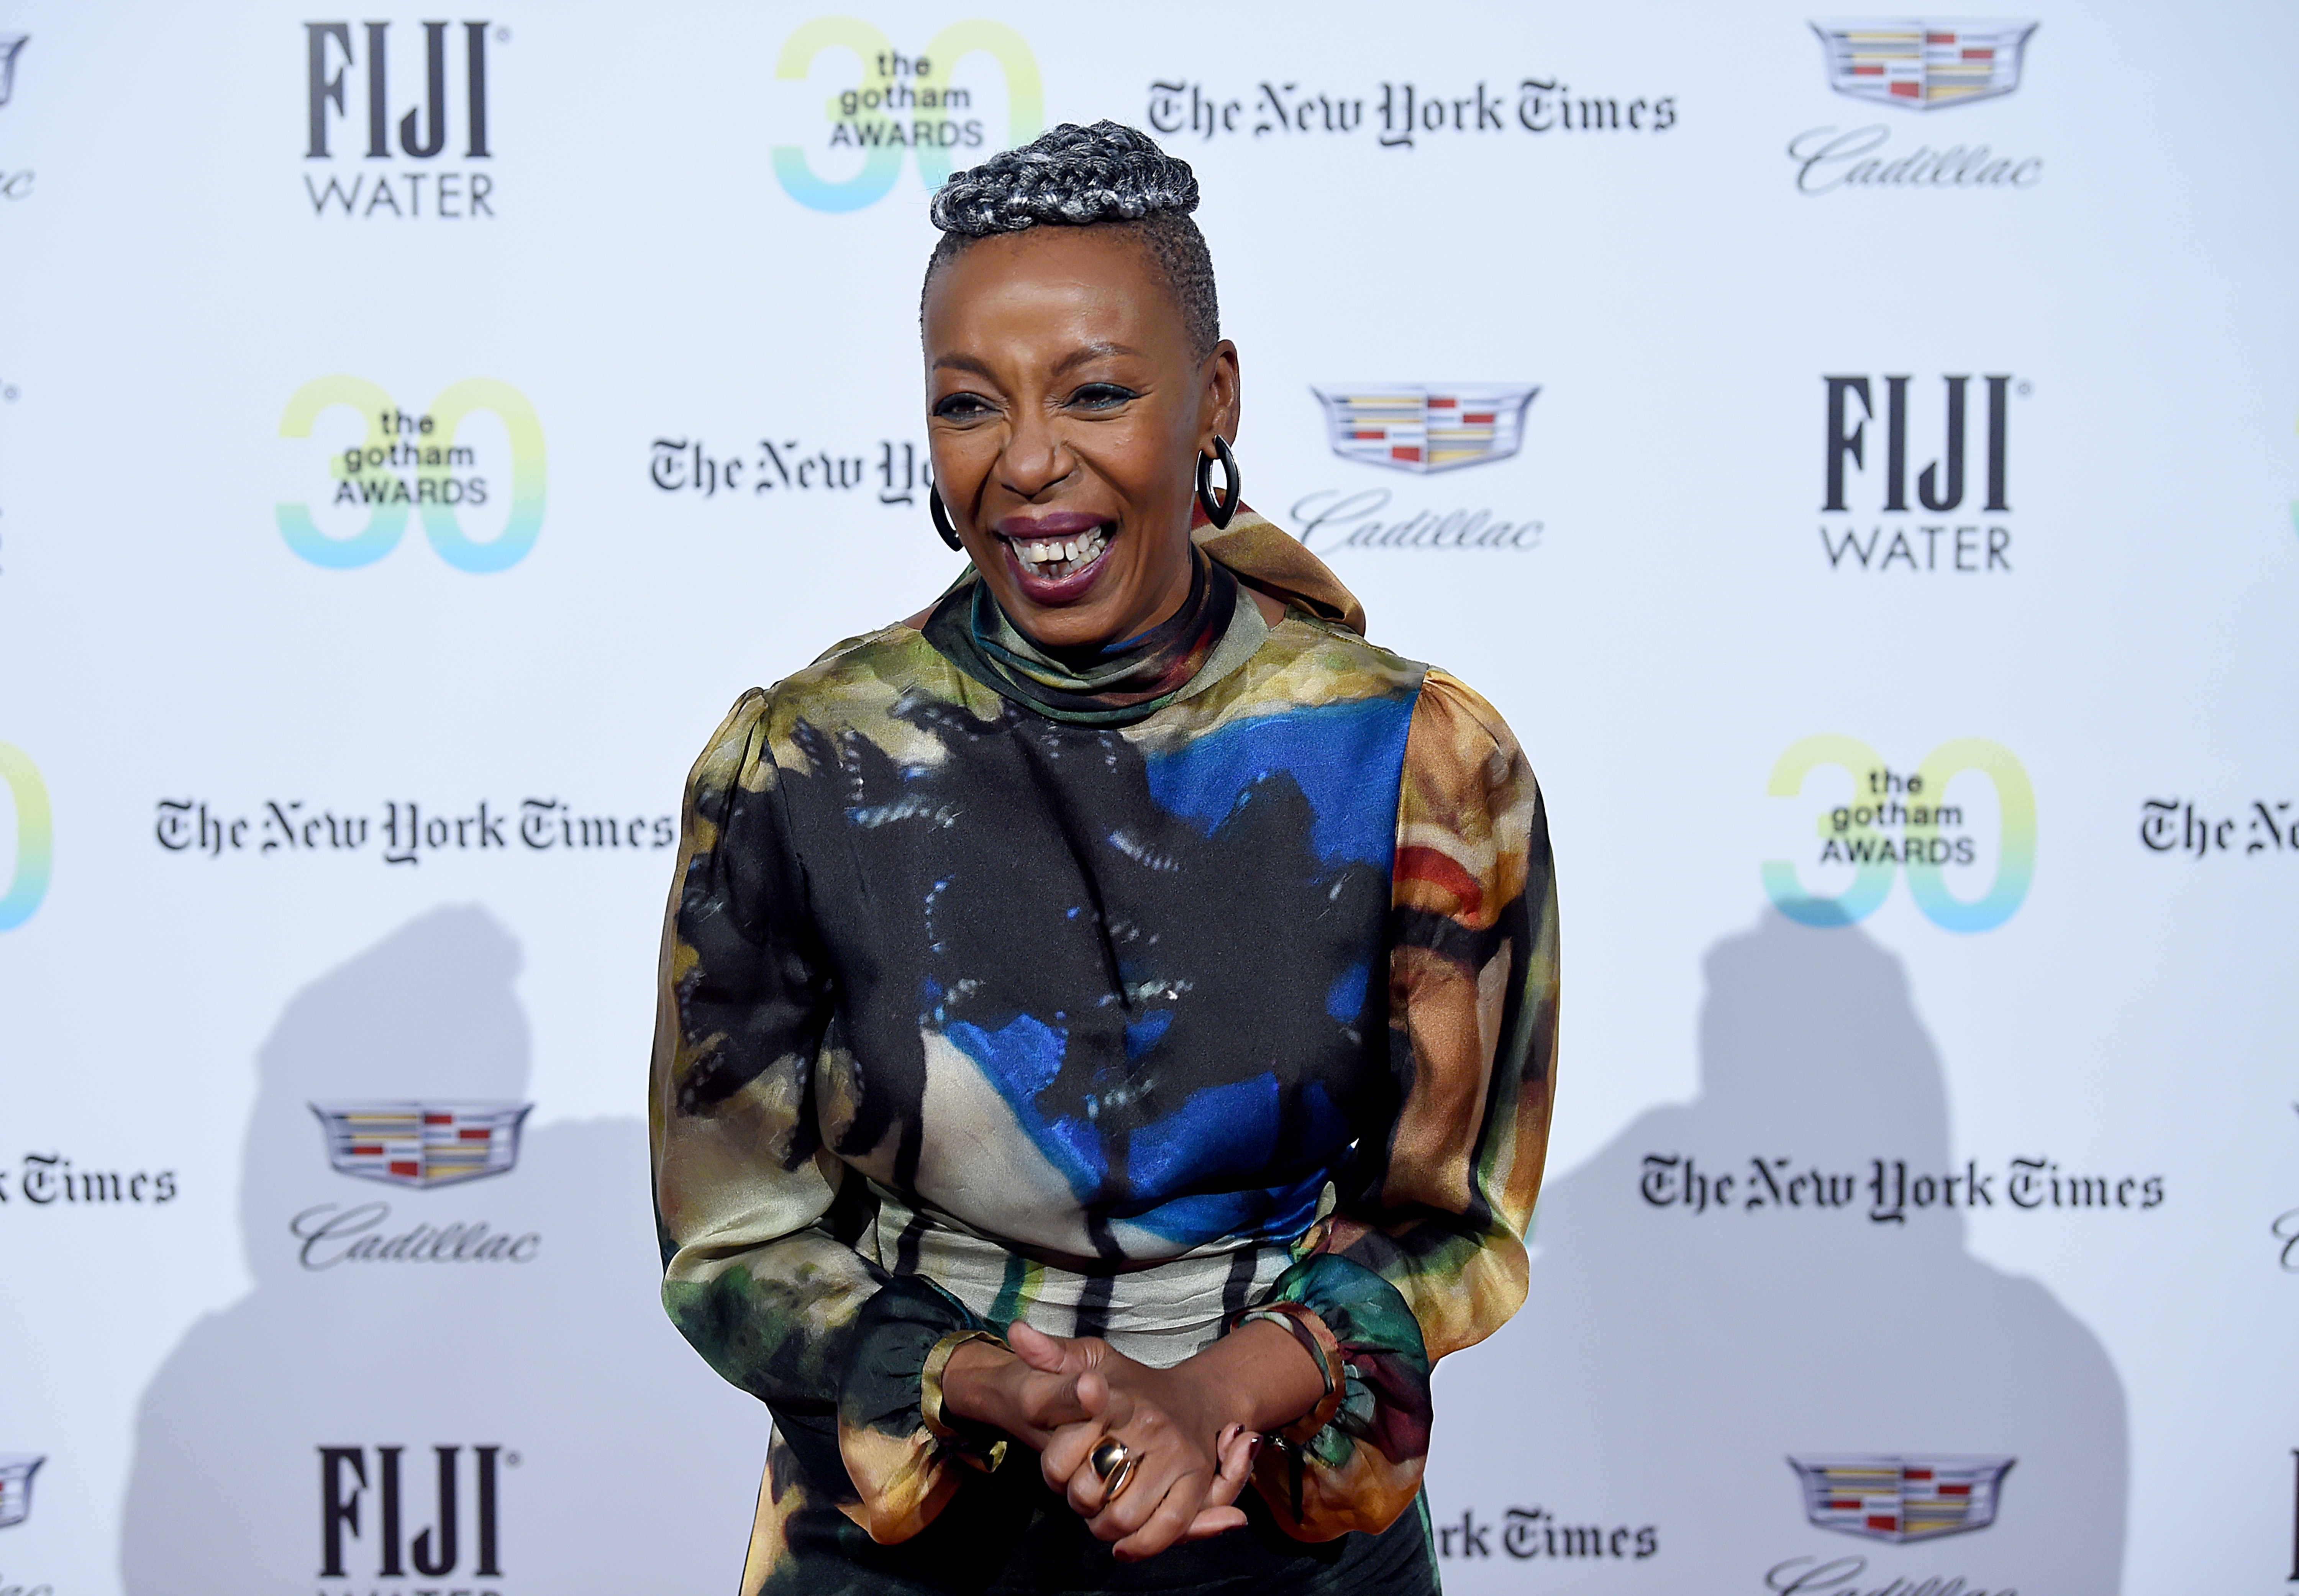 NEW YORK, NEW YORK - JANUARY 11: Noma Dumezweni attends the 30th Annual IFP Gotham Awards at Cipriani Wall Street on January 11, 2021 in New York City.